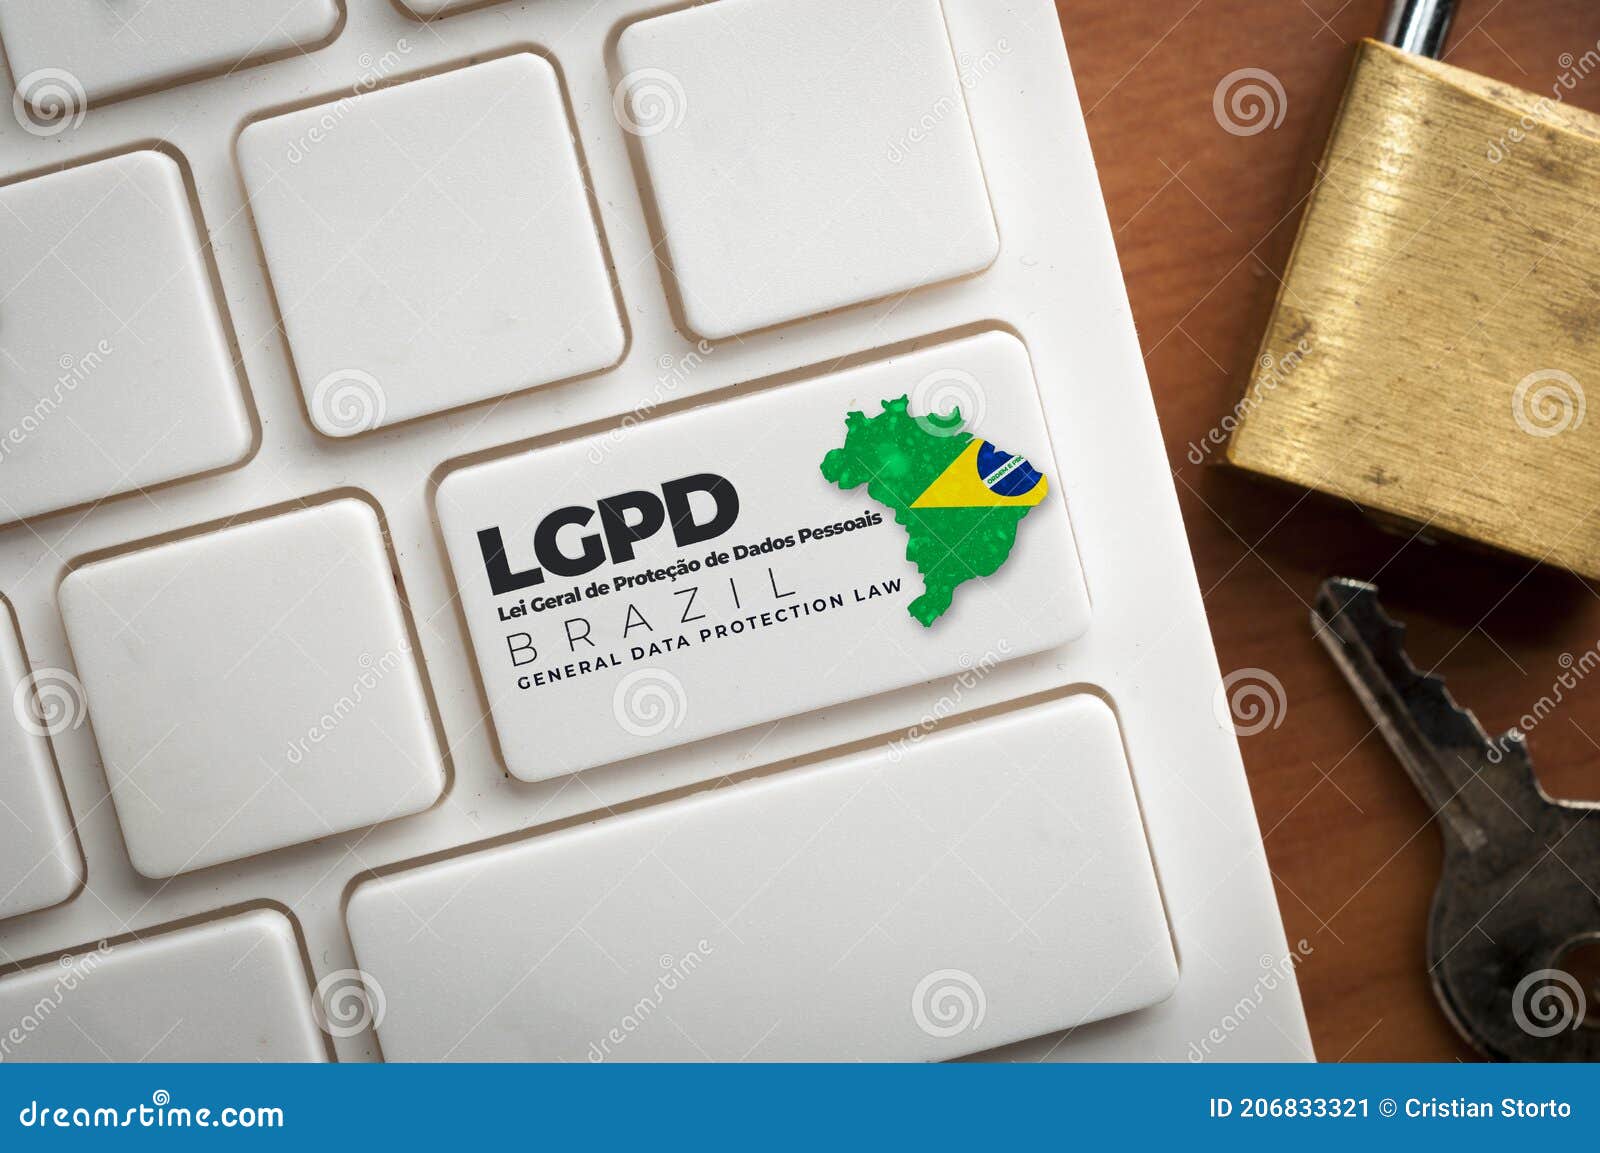 lgpd: a white keyboard with a key with text lei geral de proteÃÂ§ÃÂ£o de dados pessoais. this law regulate data protection and